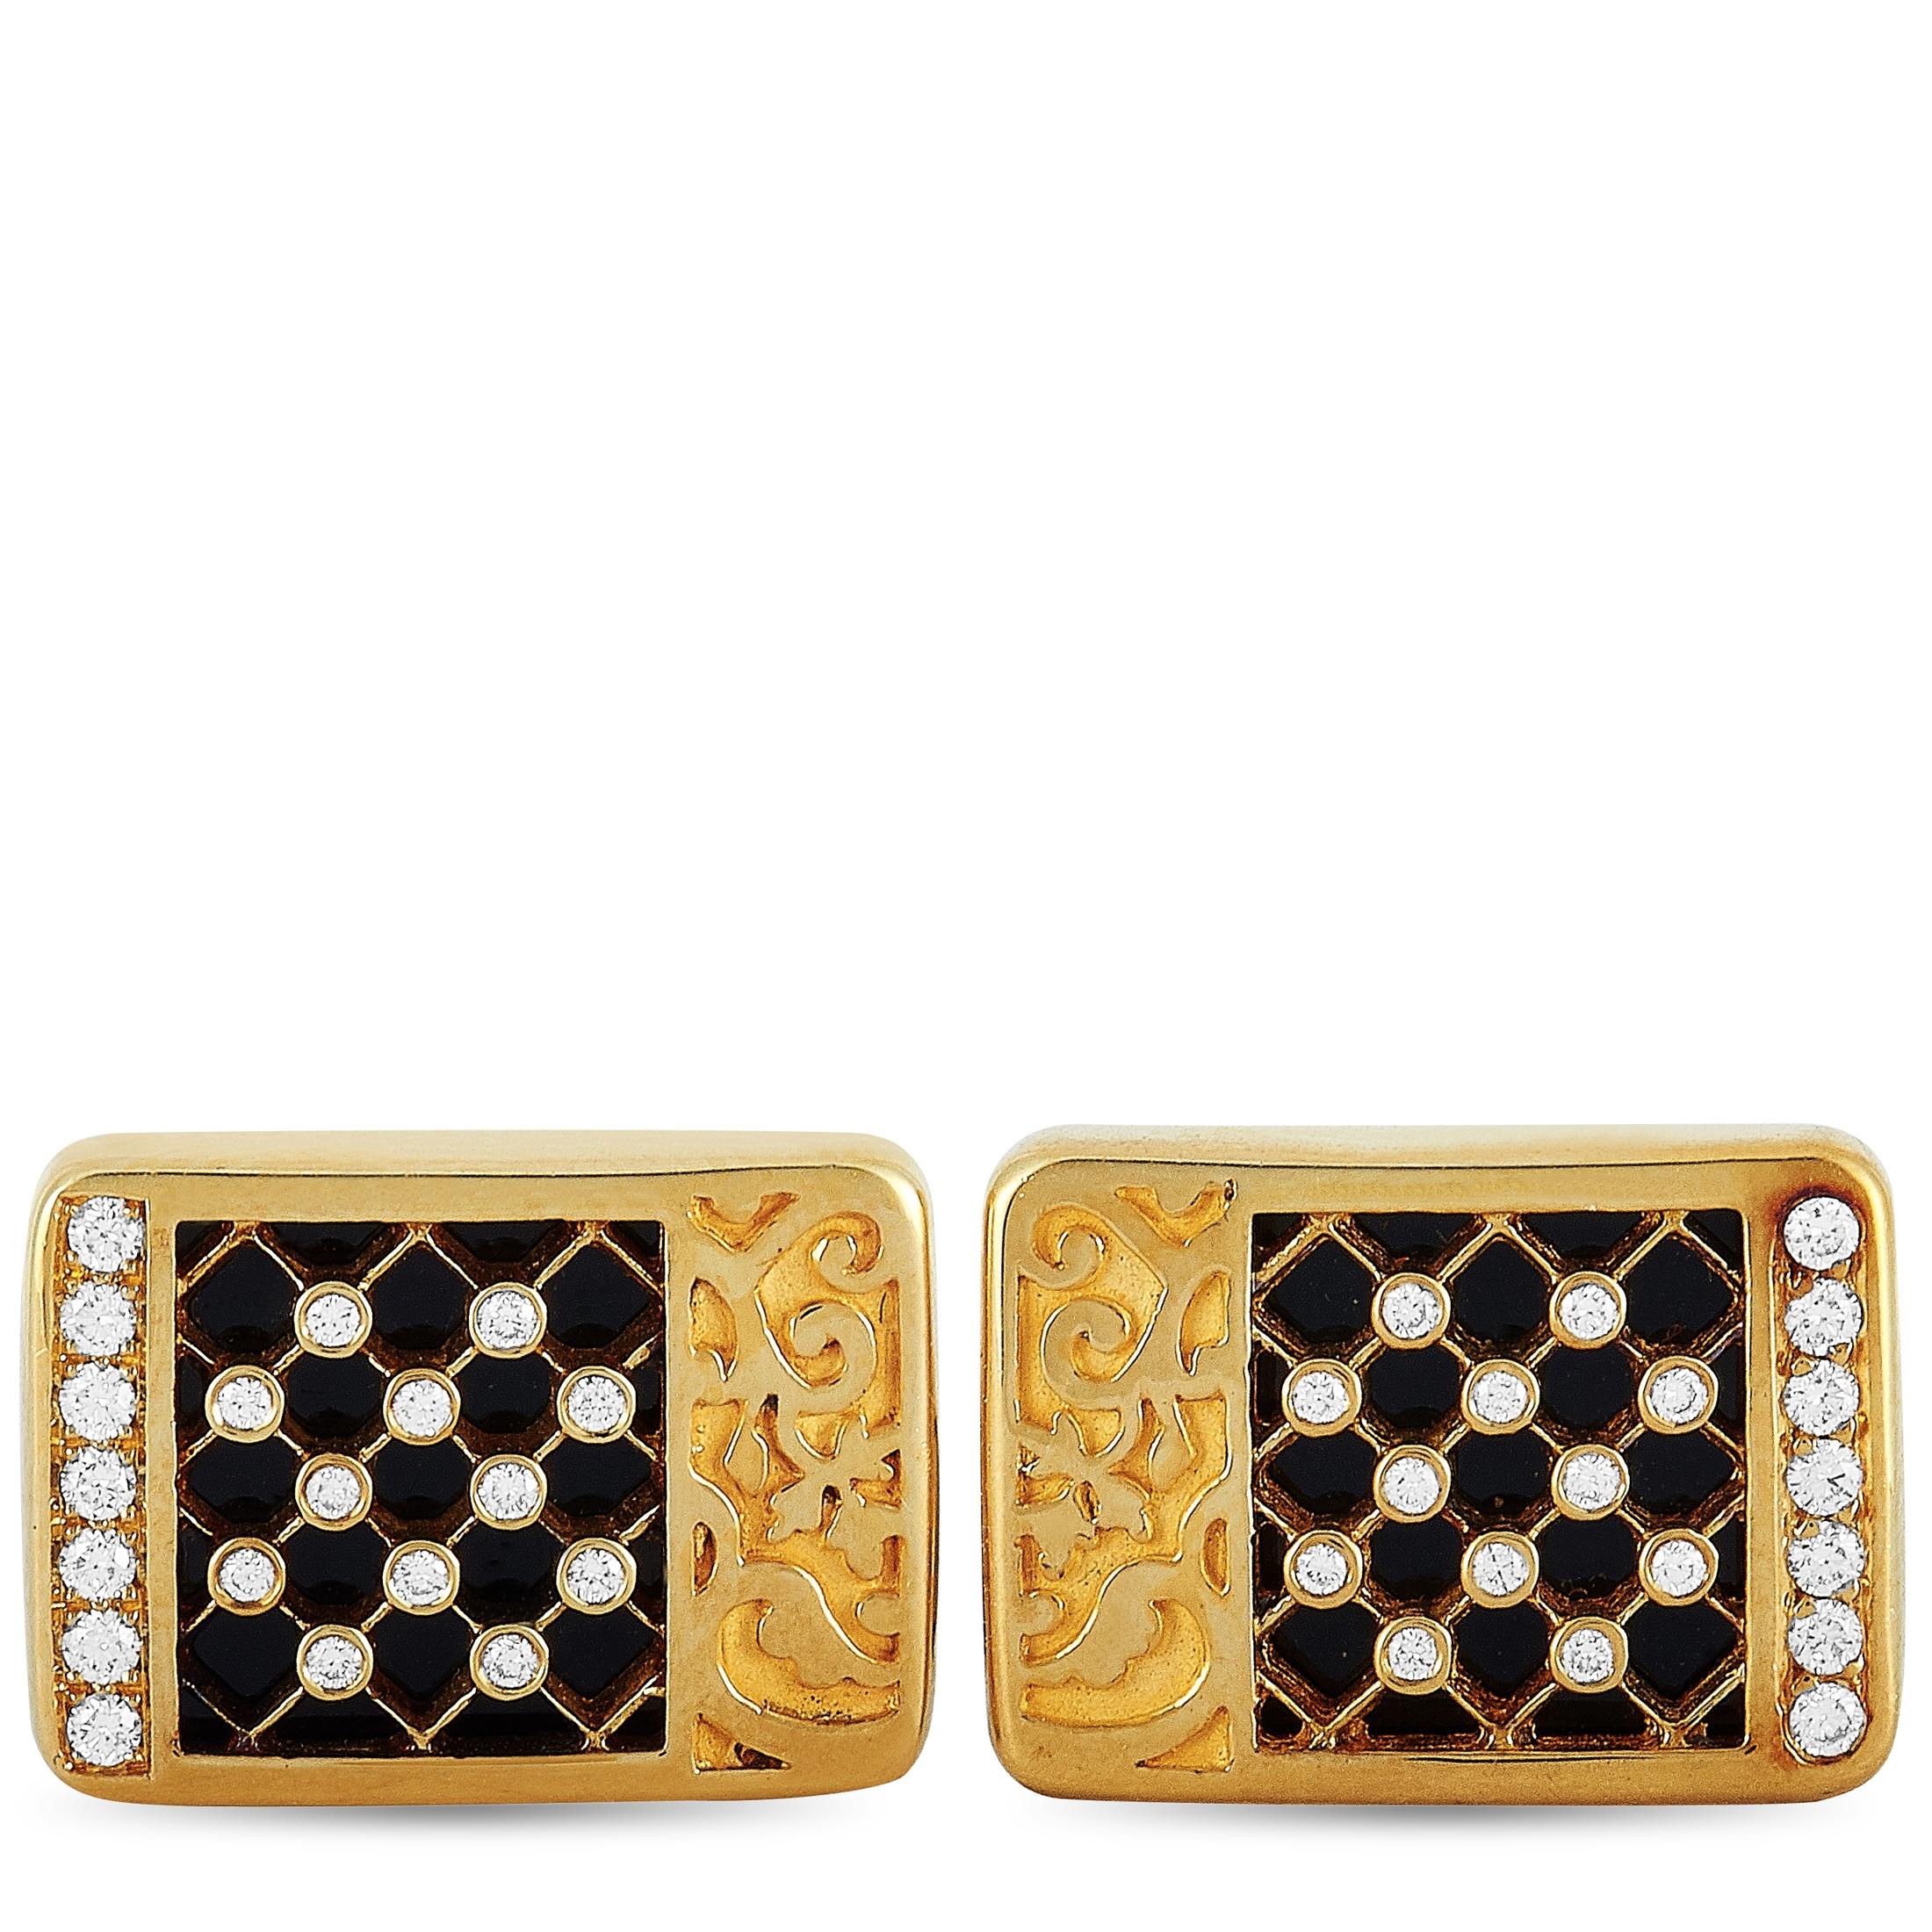 The Carrera y Carrera “Sierpes” cufflinks are made of 18K yellow gold and embellished with onyxes and a total of 0.33 carats of diamonds. The cufflinks measure 0.50” in length and 0.70” in width and each of the two weighs 8.5 grams.

The pair is